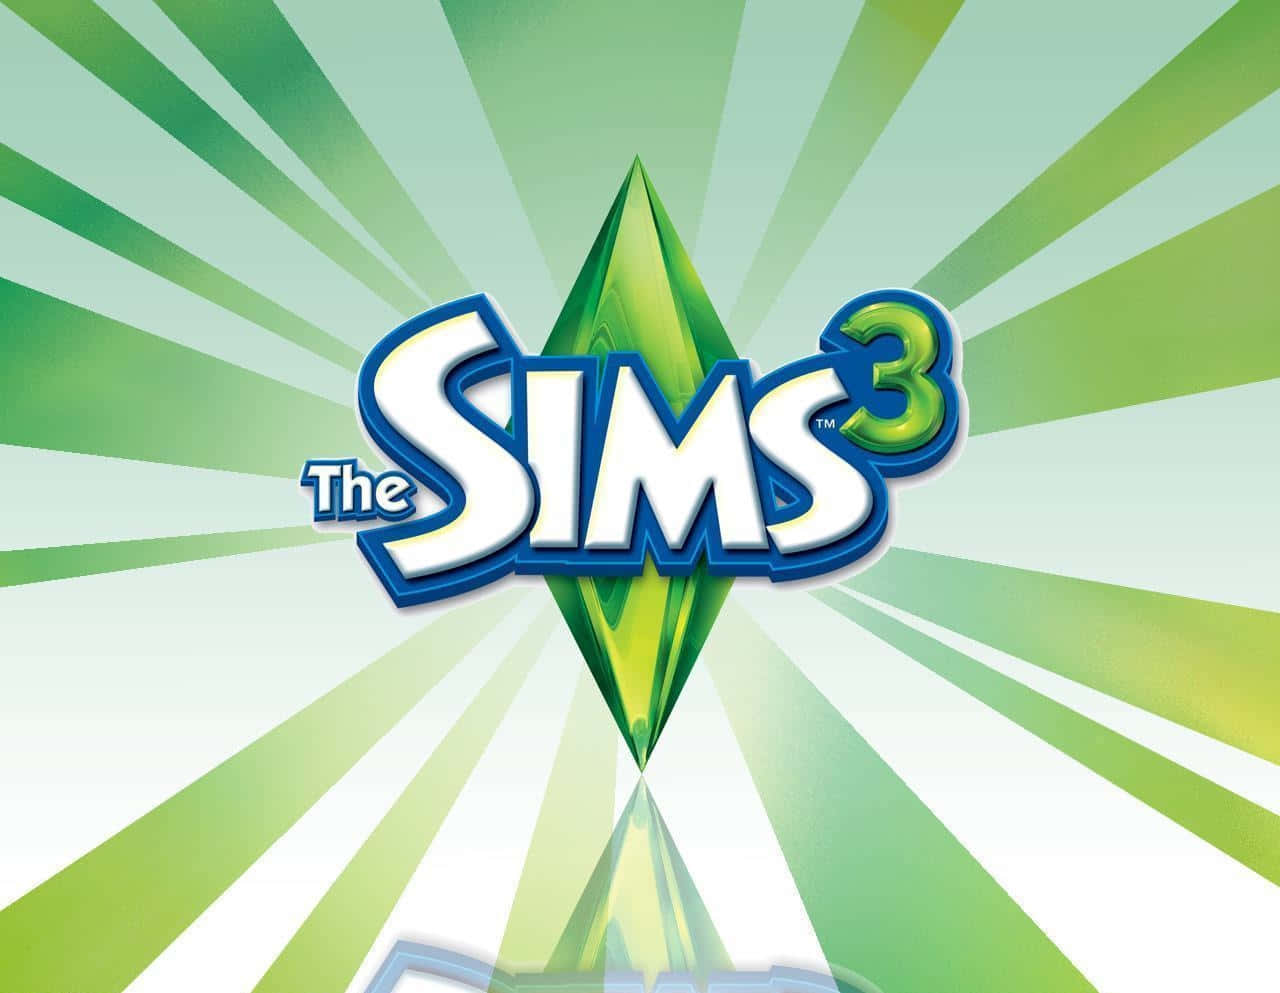 Free will has never been this fun - play The Sims 3 Wallpaper